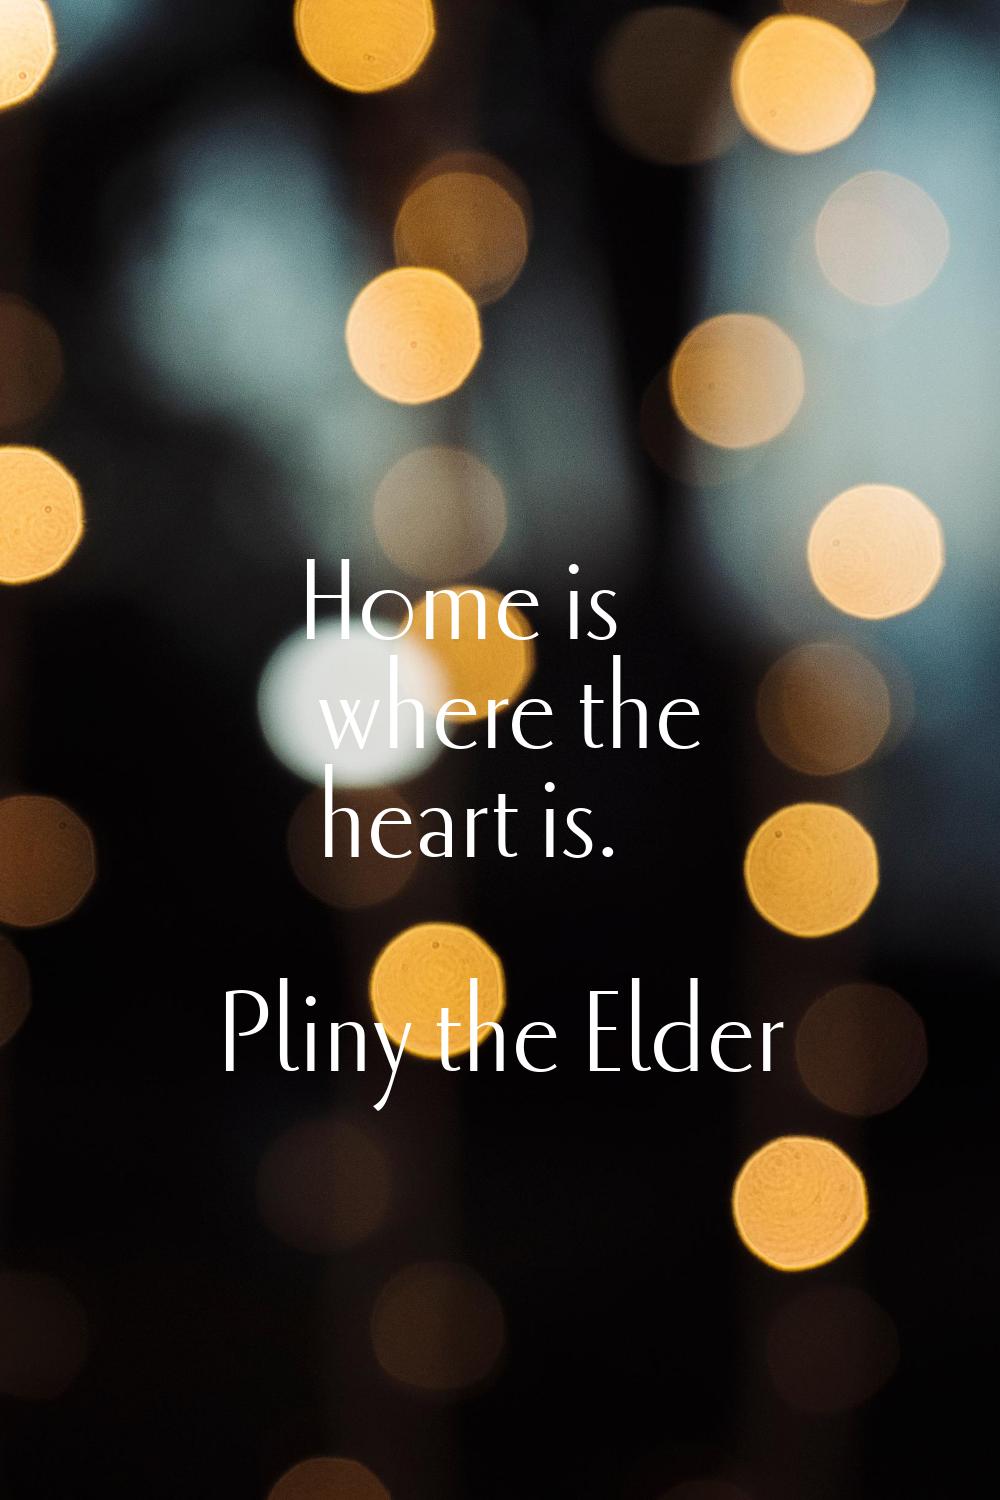 Home is where the heart is.